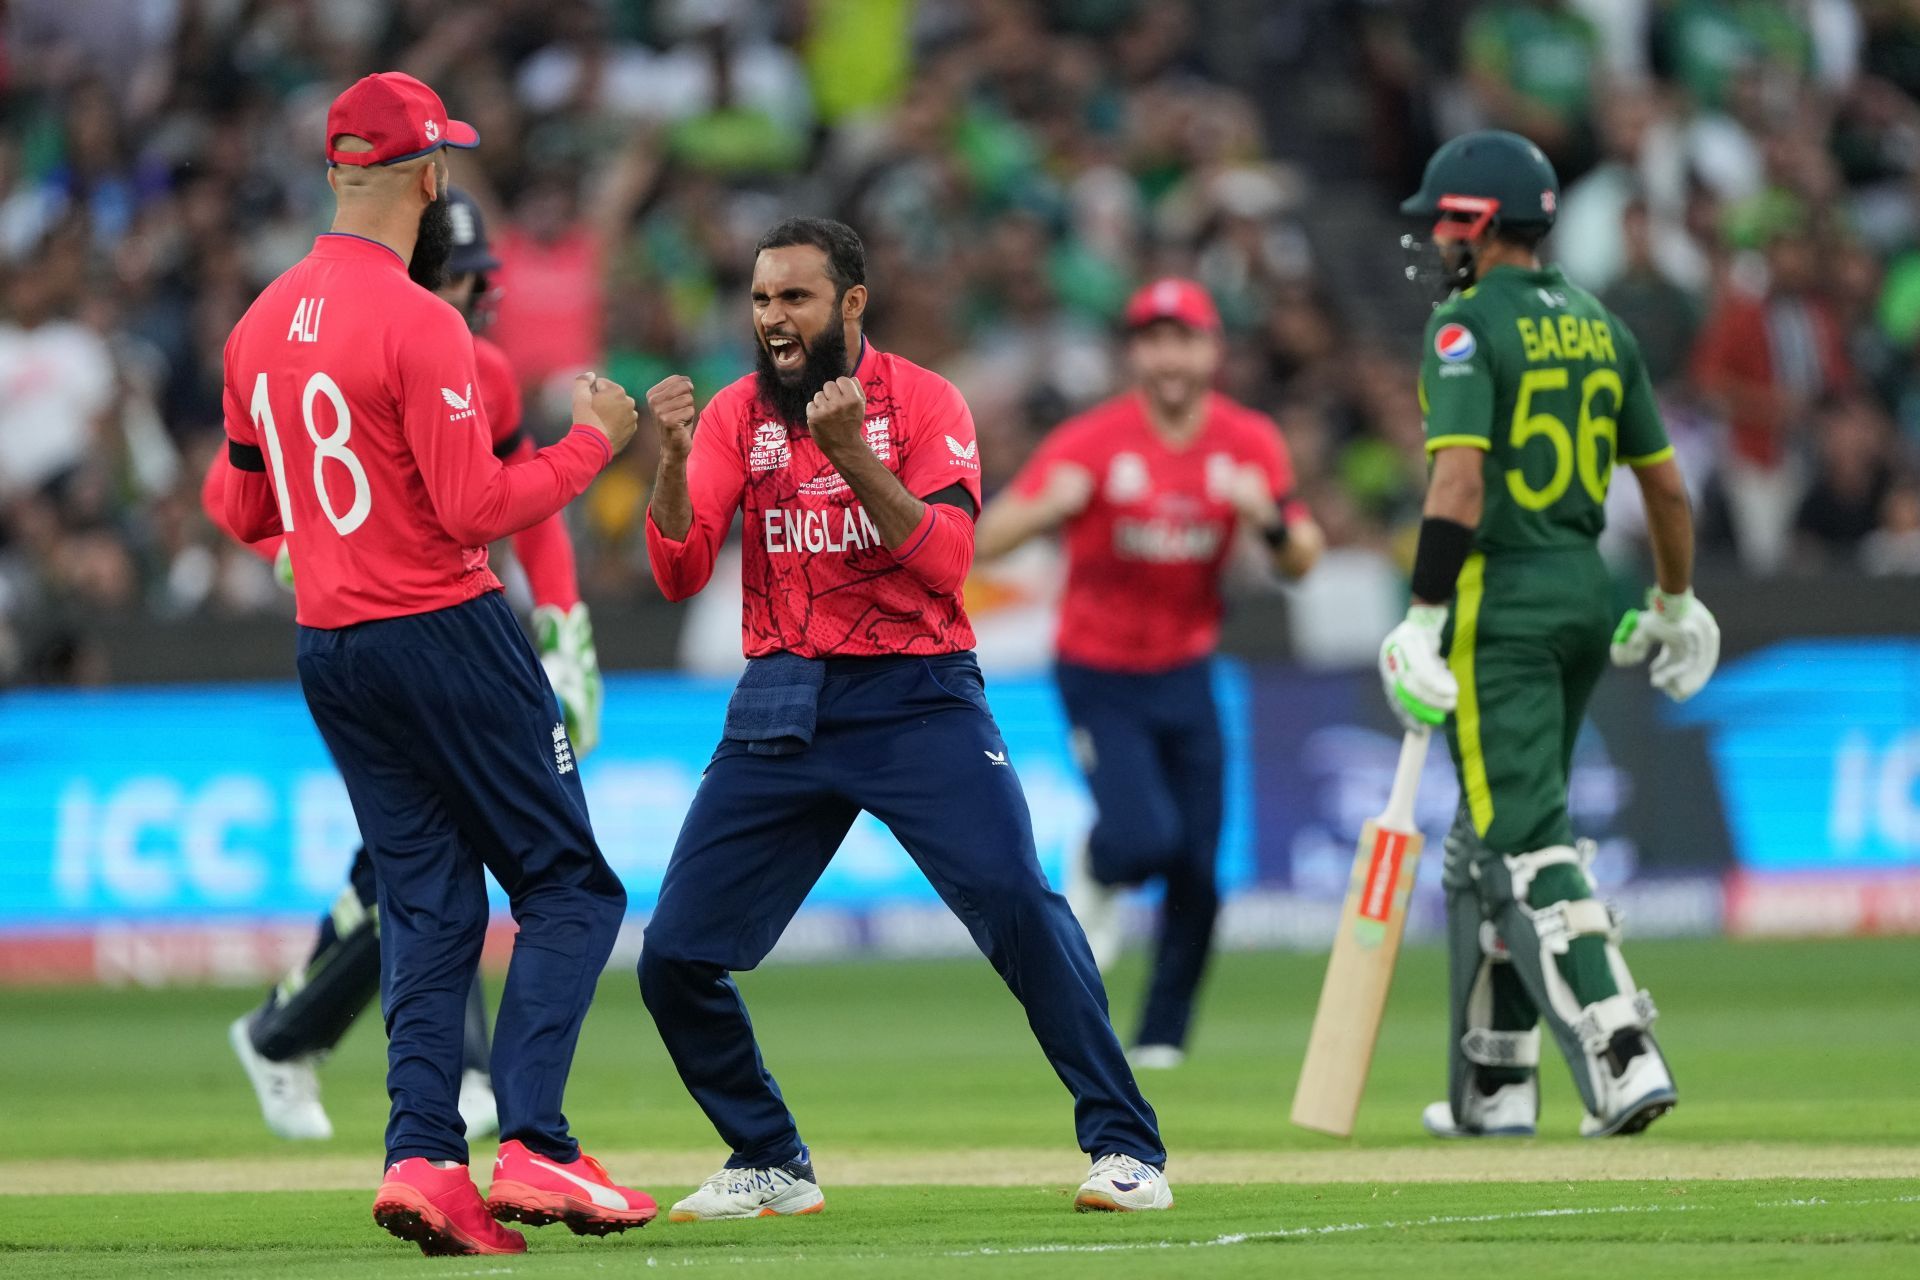 Adil Rashid took a wicket off his first delivery of the match. (Credits: Getty)